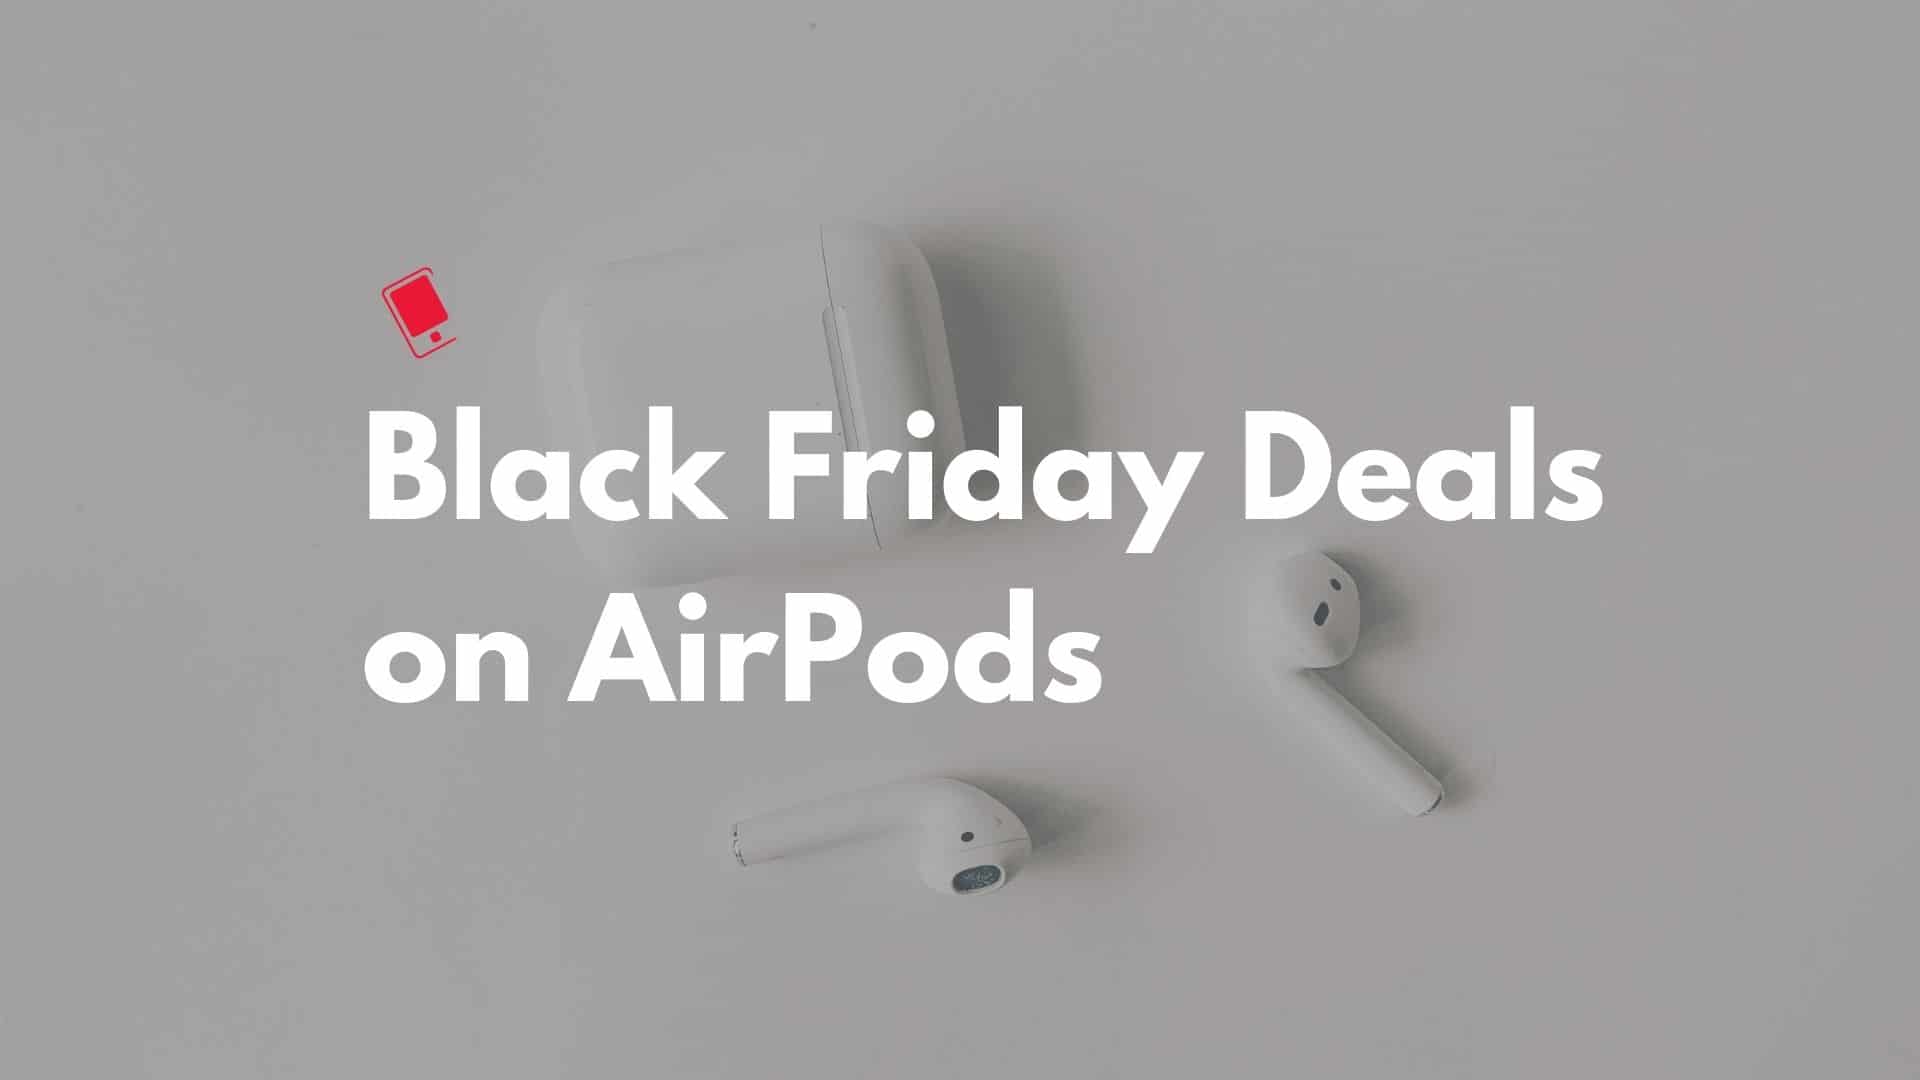 AirPods Pro Black Friday 2020 deals